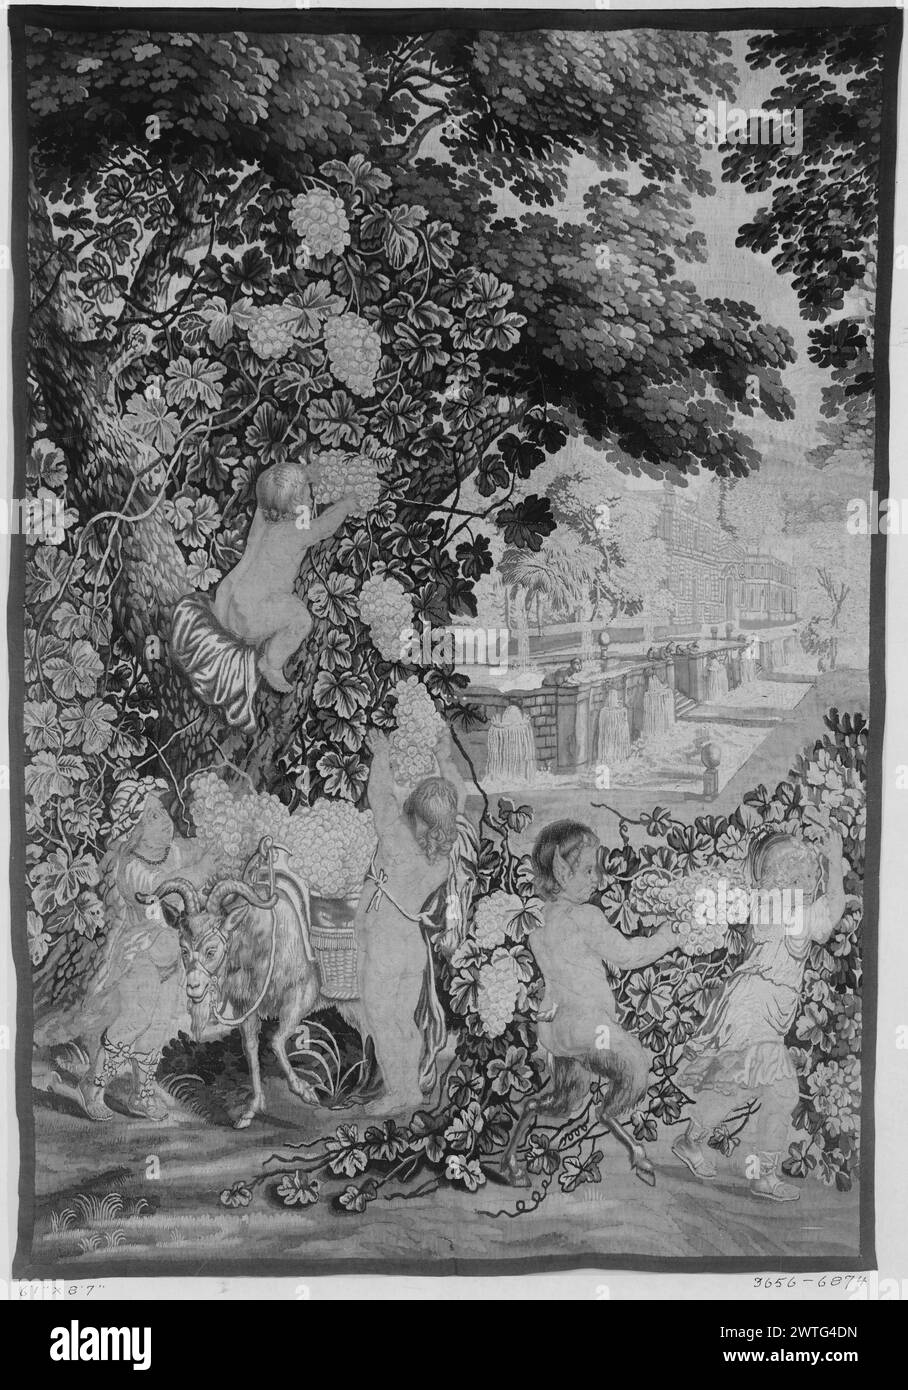 Children playing in vintage scene. unknown c. 1690 Tapestry Dimensions: H 8'7' x W 6'1' Tapestry Materials/Techniques: unknown Culture: Flemish Weaving Center: unknown Ownership History: French & Co. purchased from Bacri frères 4/10/1918; sold to S. J. Bloomingdale, Esq. 1/10/1919. In garden park, children pick grapes & load them into baskets on goat; path leads to château in L distance Borders missing. French & Co. stock sheet in archive, 6874 Related Works: Compositionally similar tapestry (same cartoon, R part of composition, reversed): GCPA 0241503 Stock Photo